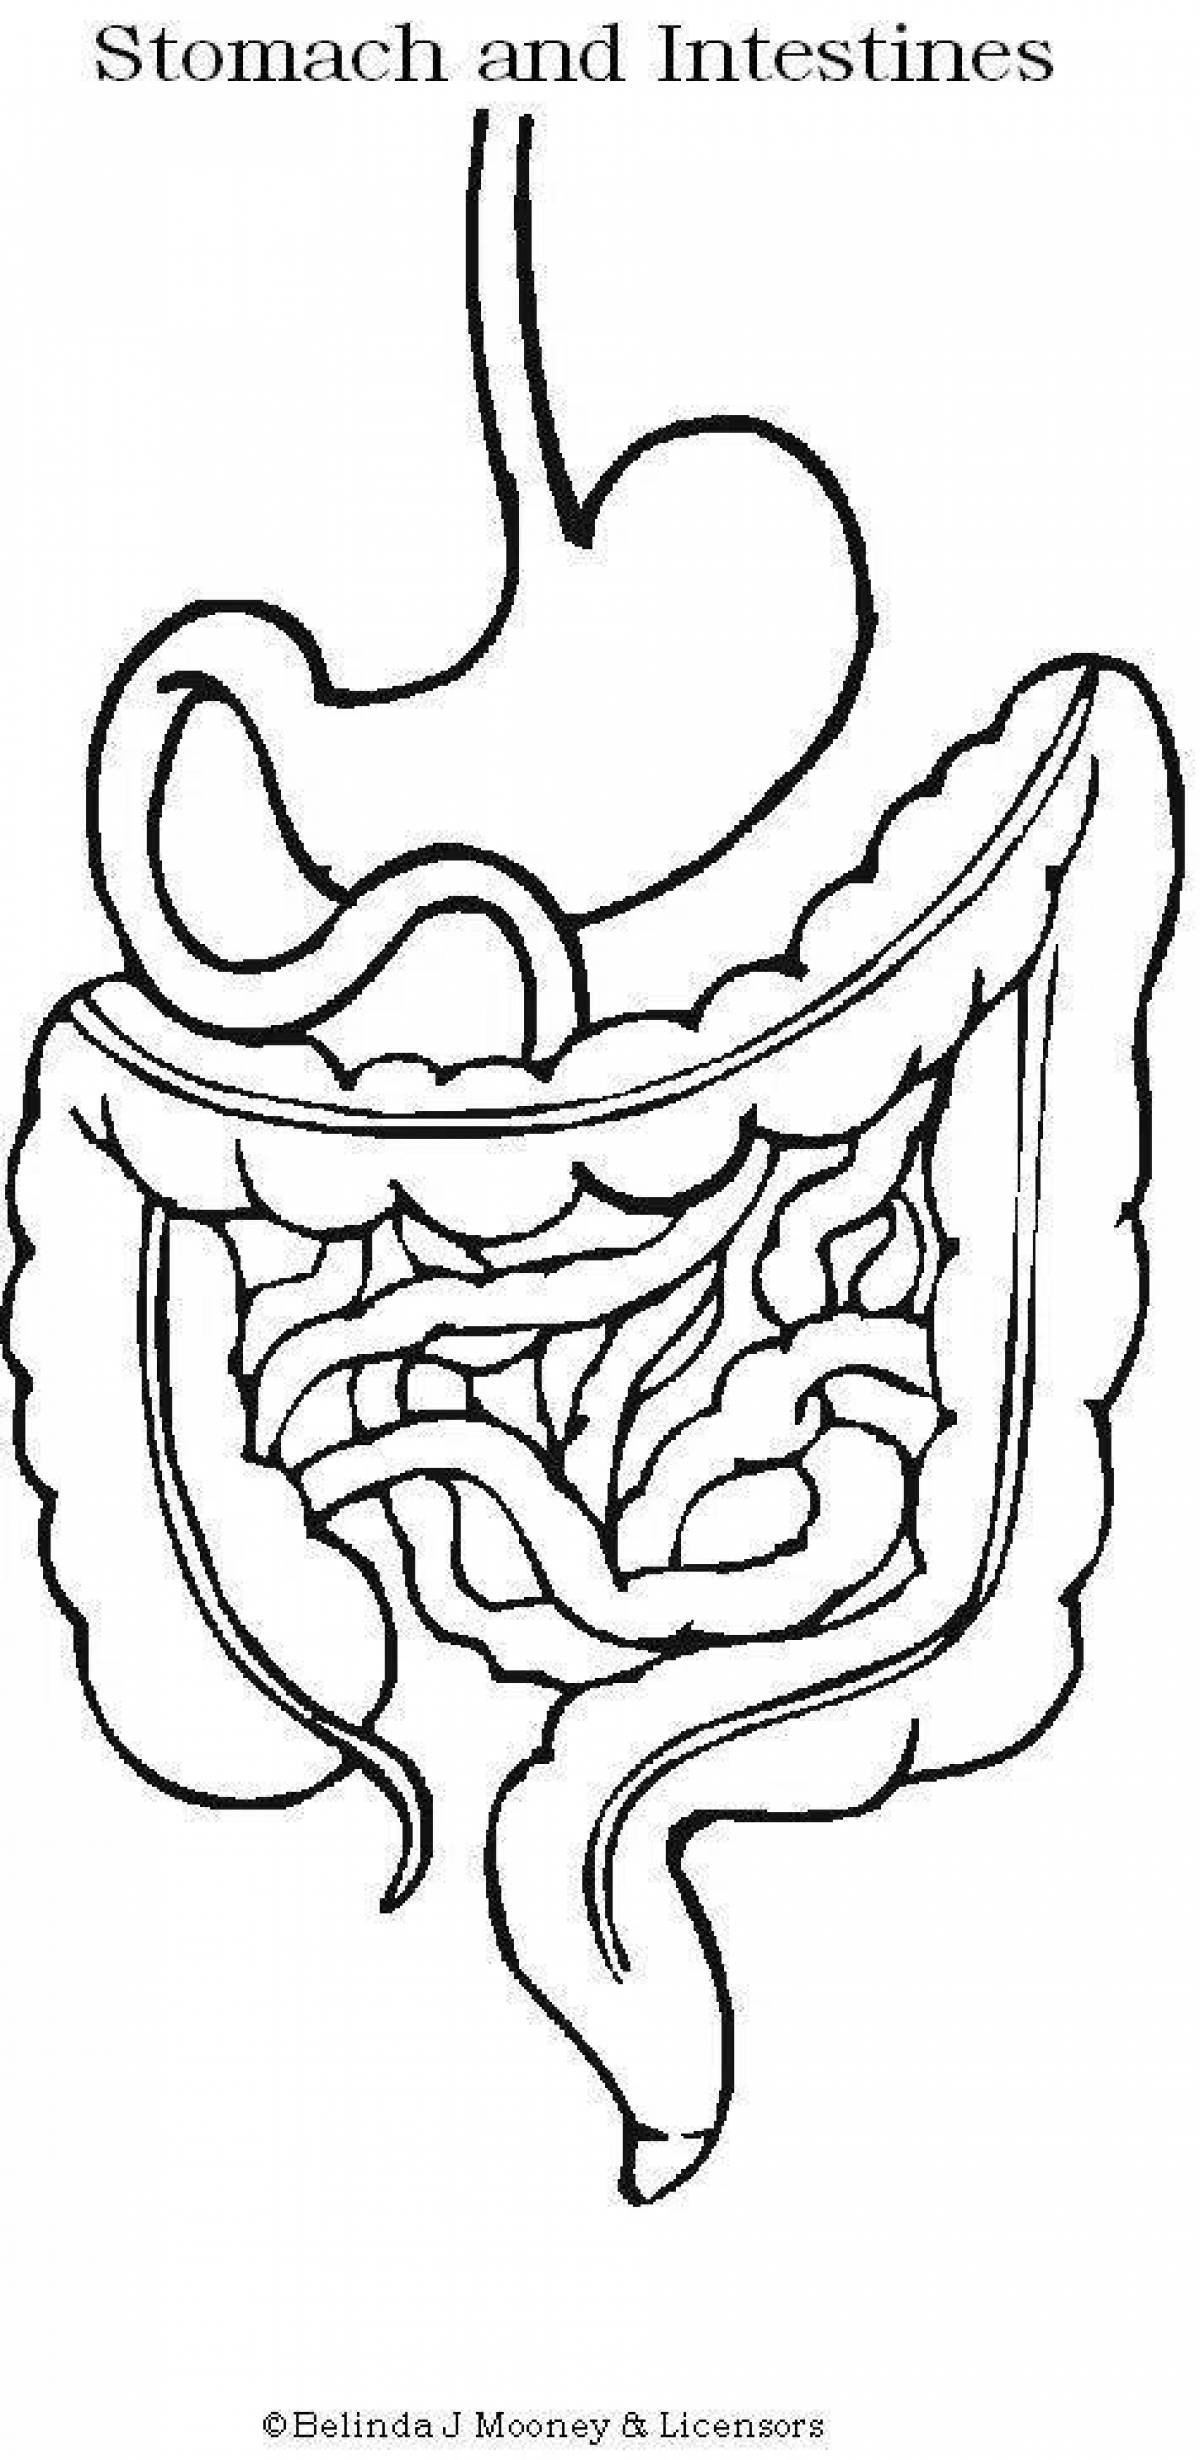 Tempting Digestive System Coloring Page